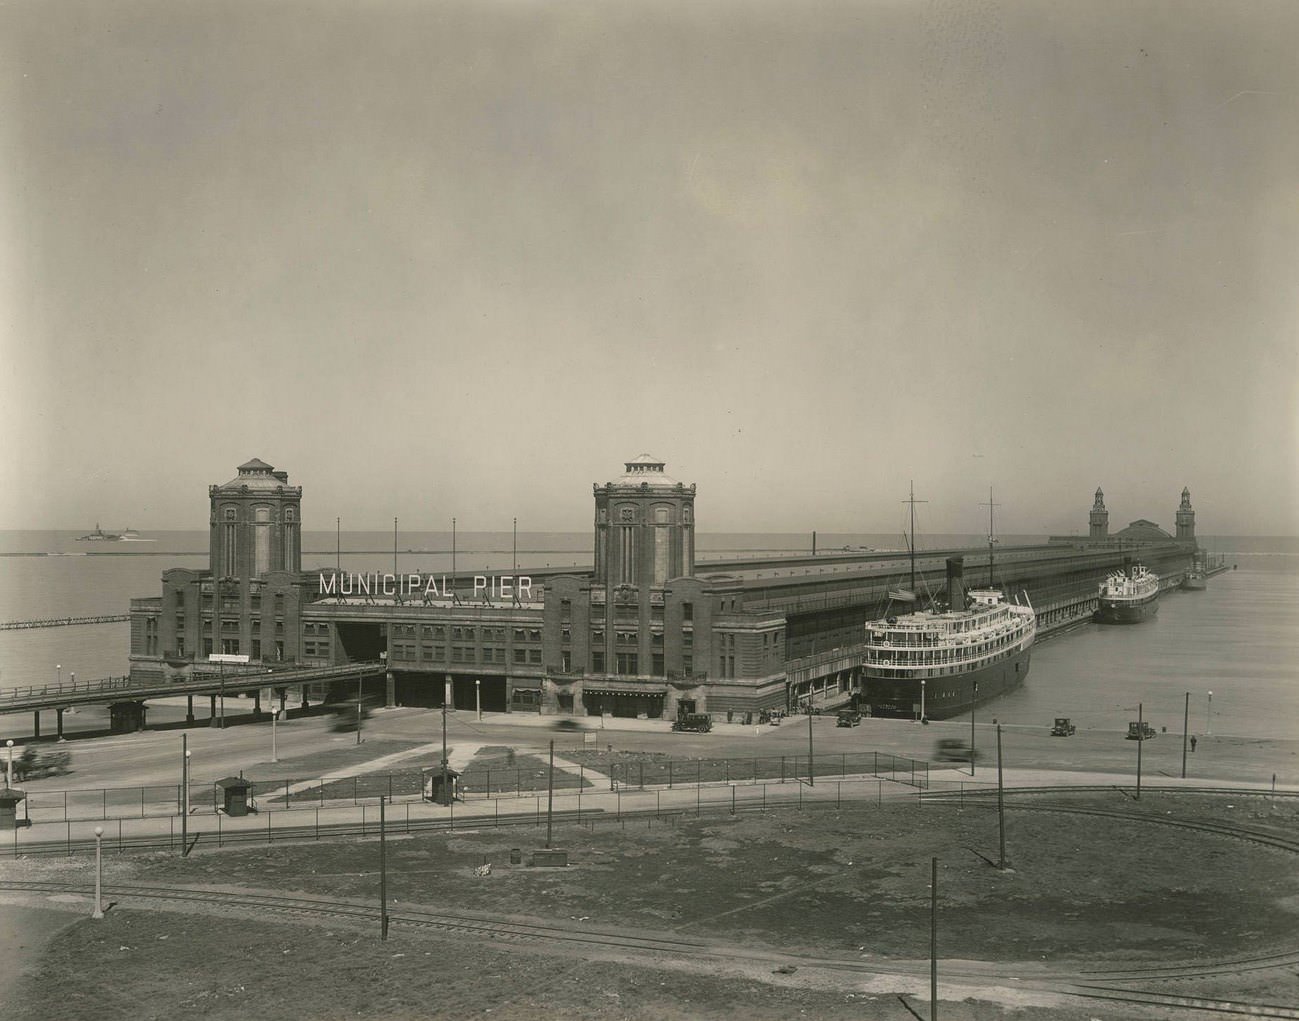 Exterior view of Municipal Pier, later renamed Navy Pier, Chicago, Illinois, 1917.